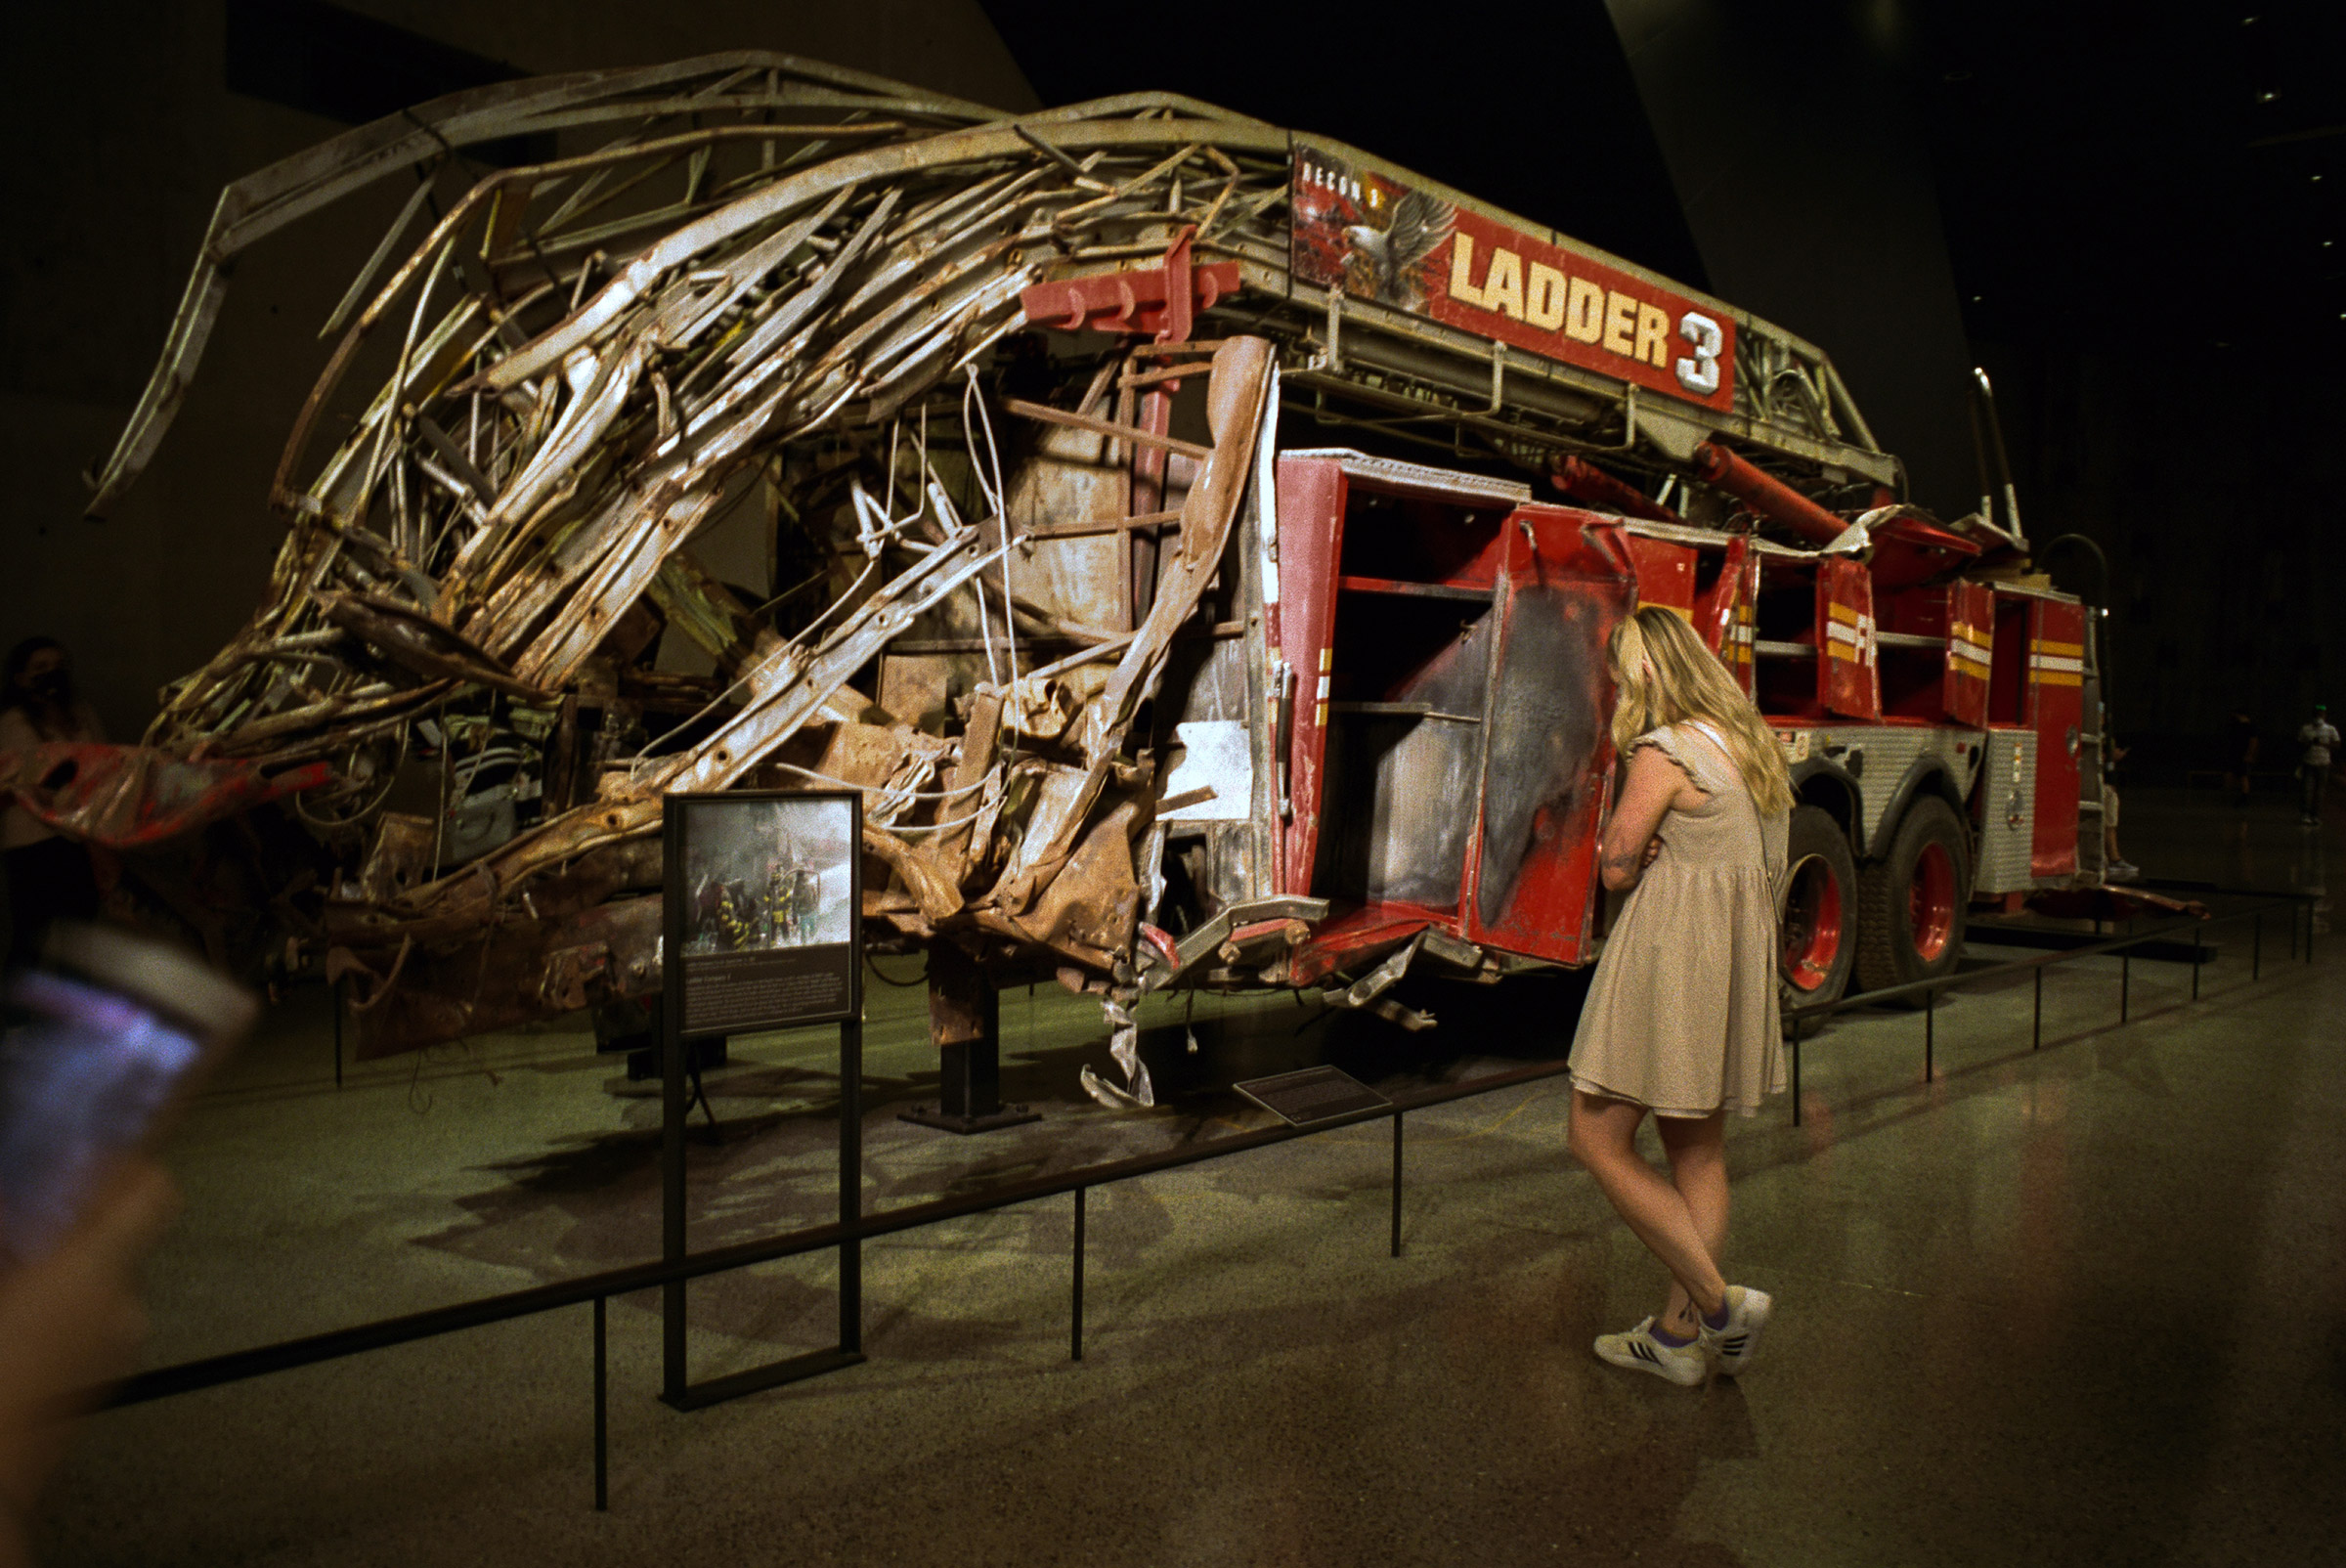 New York, NY - 9/5/21 - A mangled firetruck gives visceral resonance to the easily reawakened wound commemorated at the 9/11 museum.